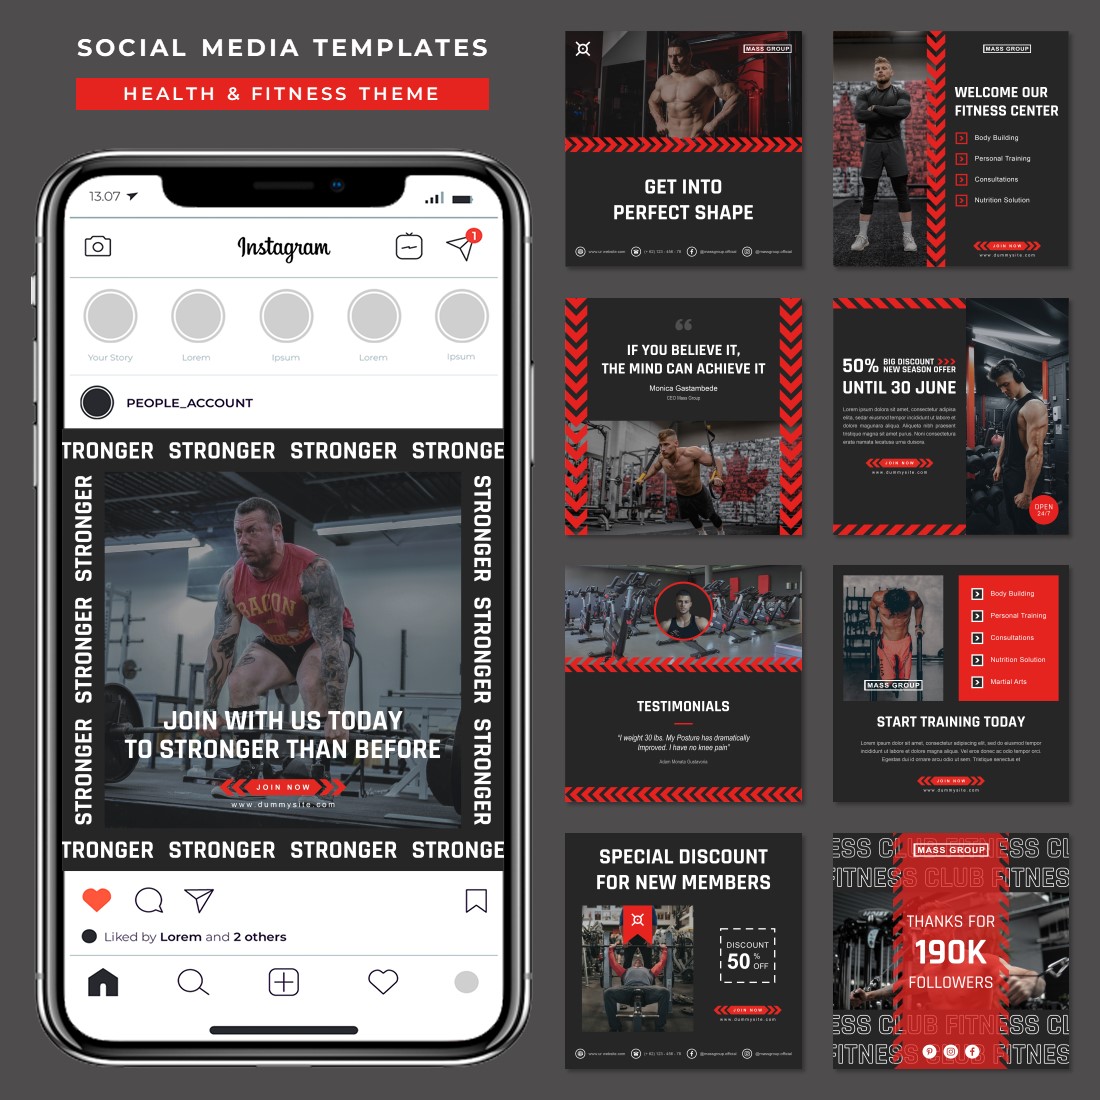 Fitness Social Media Post Templates cover image.